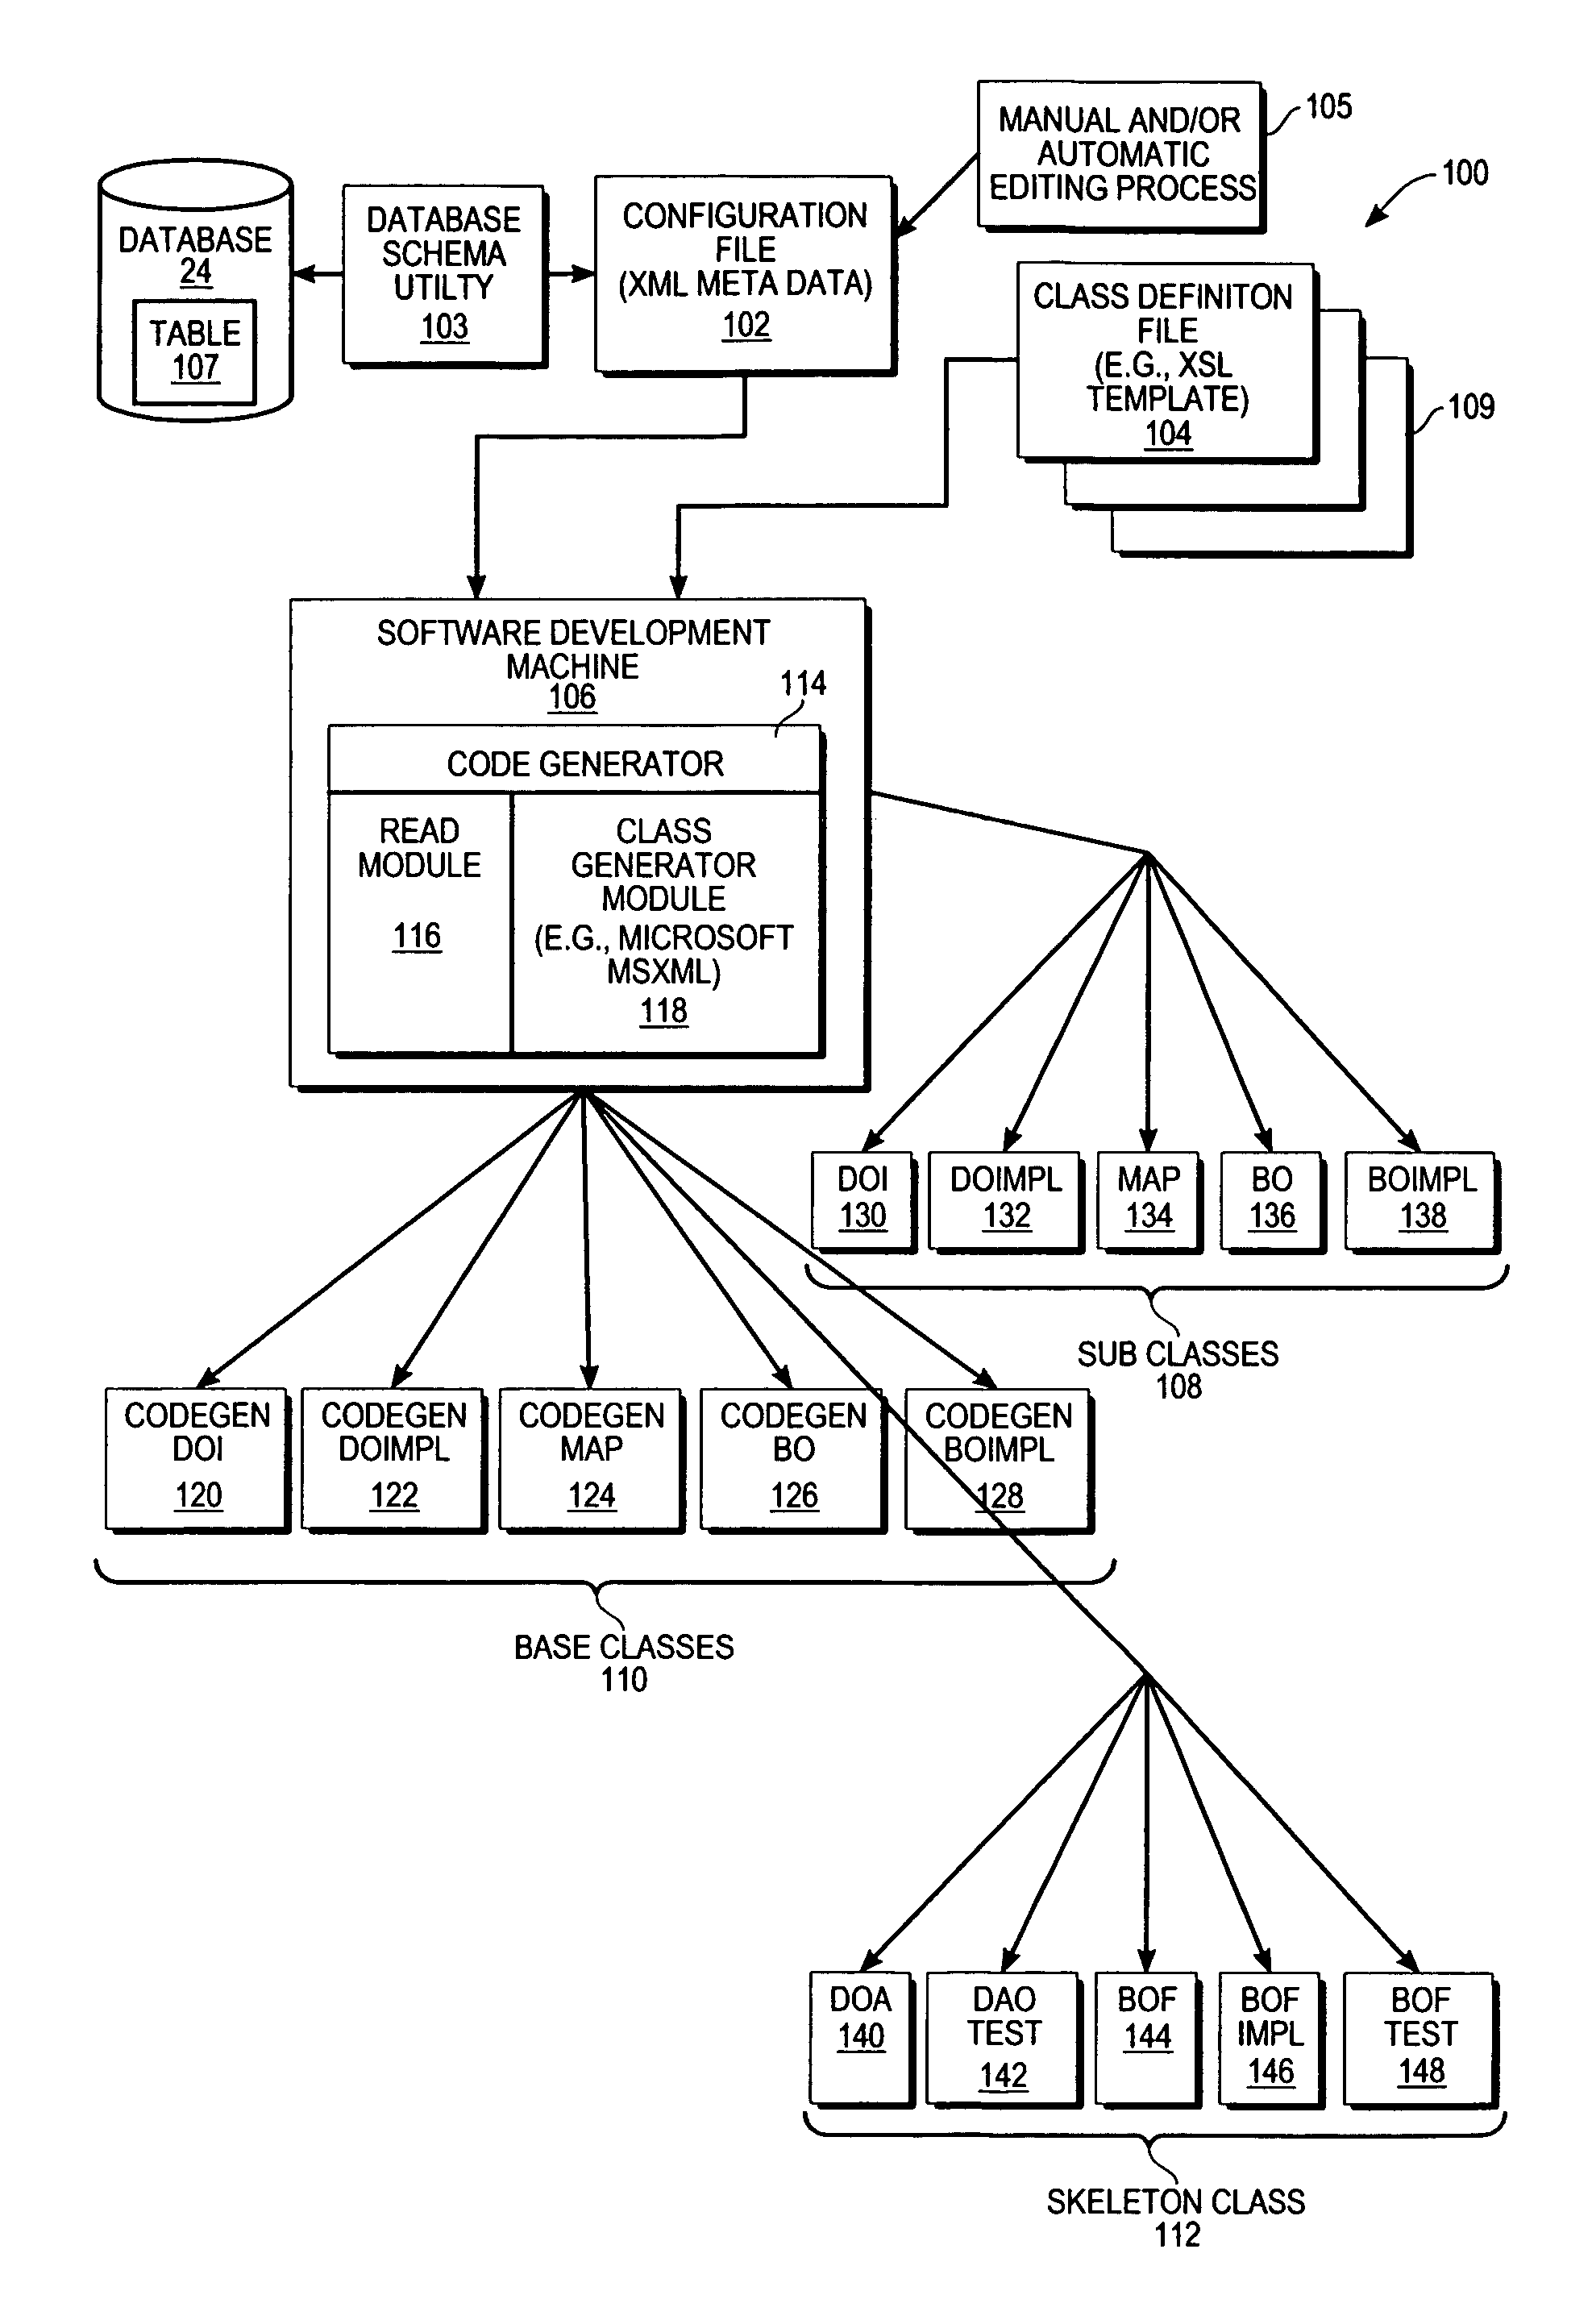 Method and system to automatically generate software code